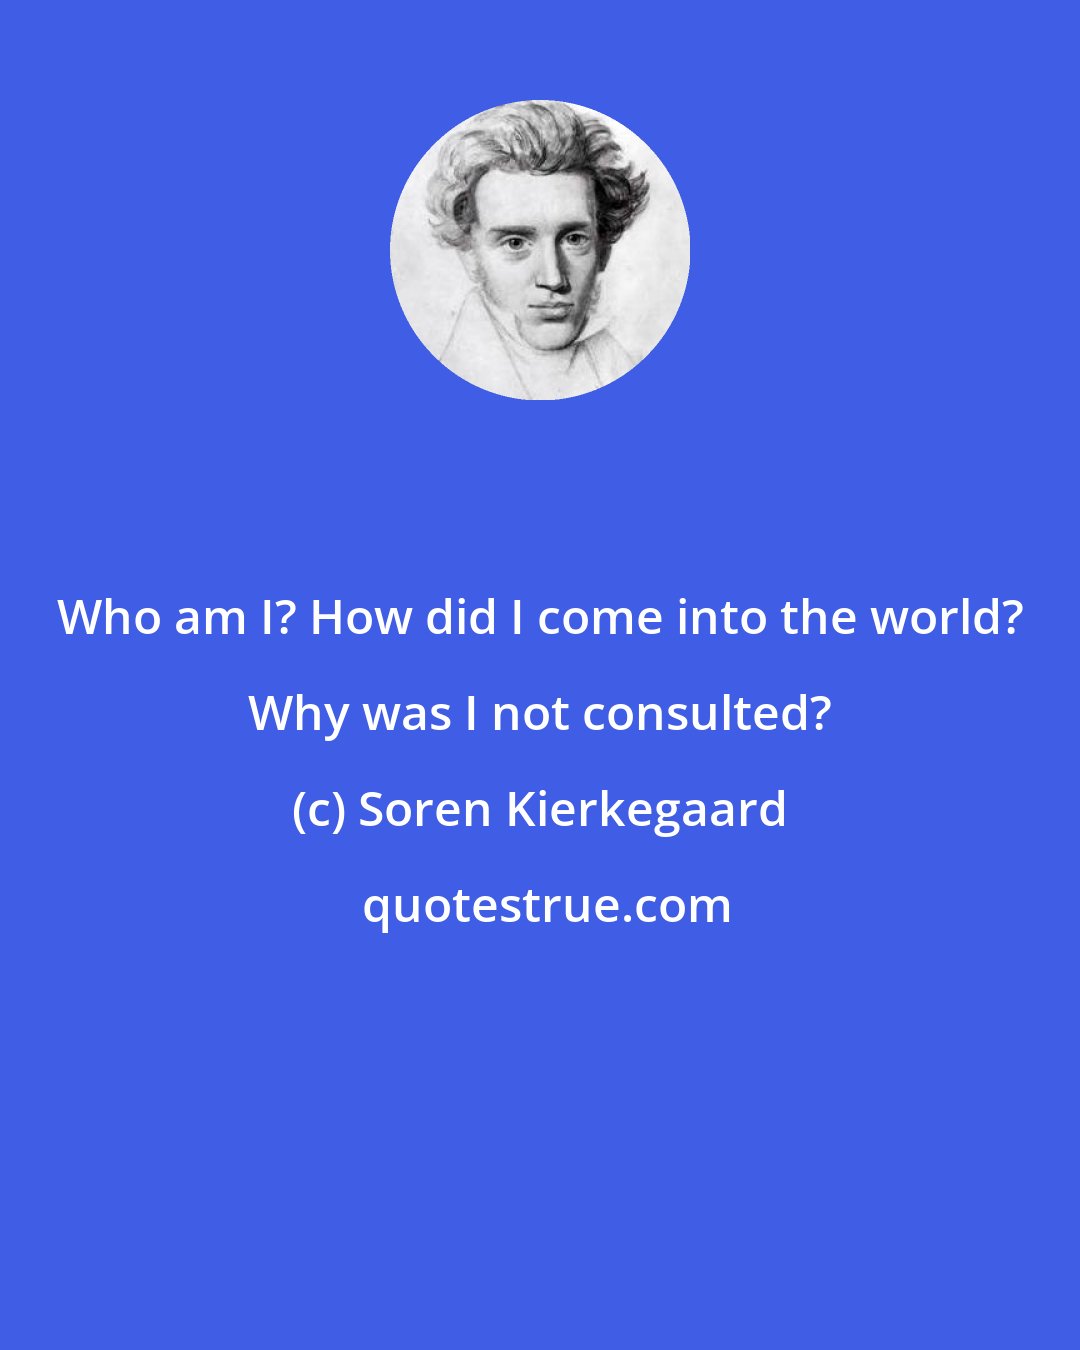 Soren Kierkegaard: Who am I? How did I come into the world? Why was I not consulted?